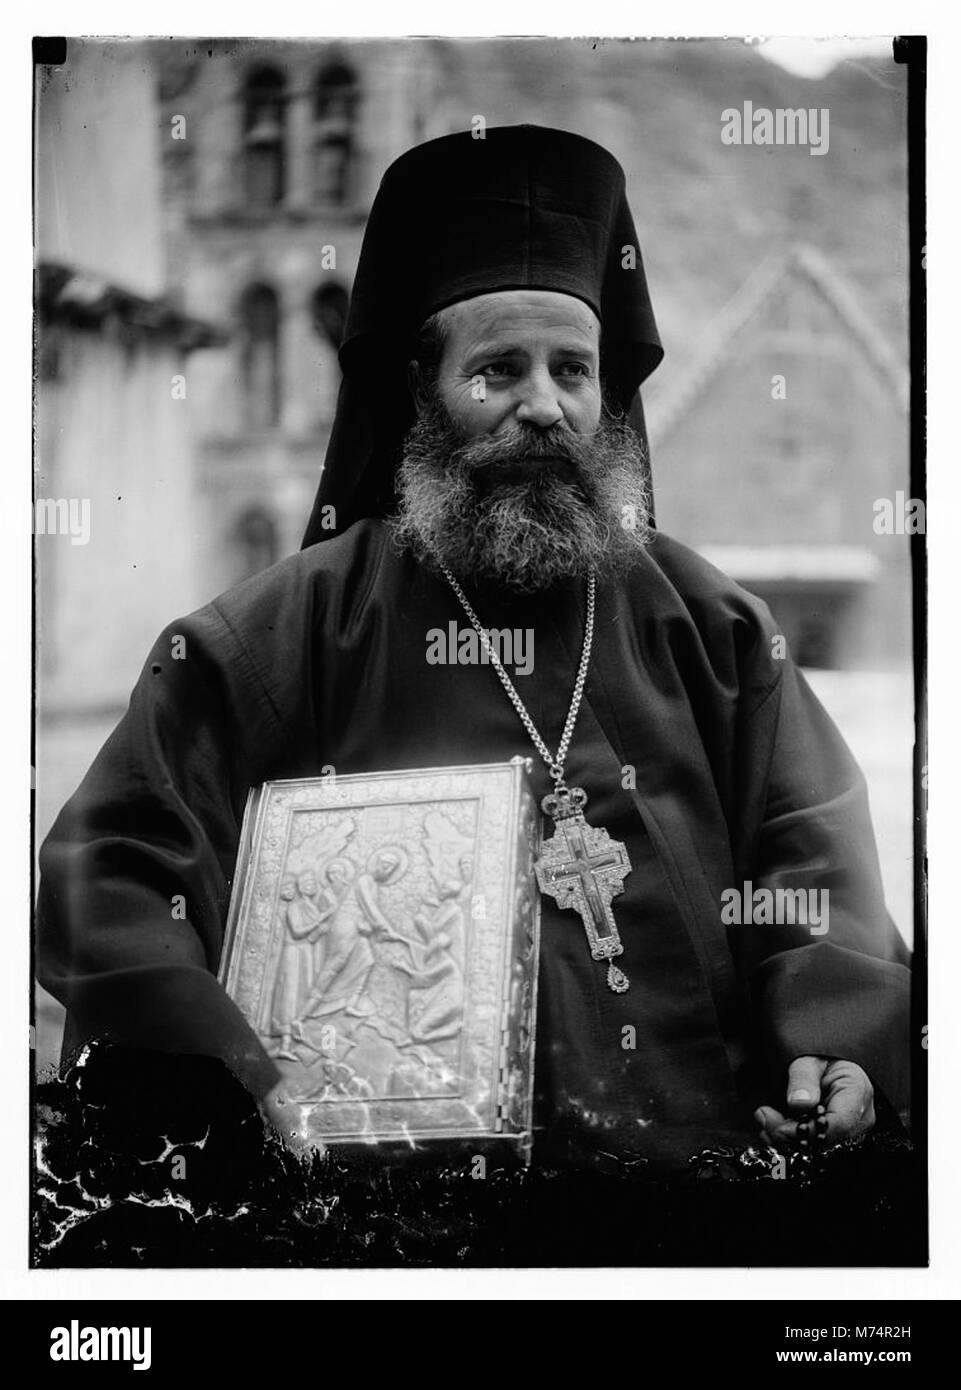 Greek Orthodox priest at St. Catherine's Monastery in the Sinai holding prized manuscript with silver cover from their library LOC matpc.09663 Stock Photo